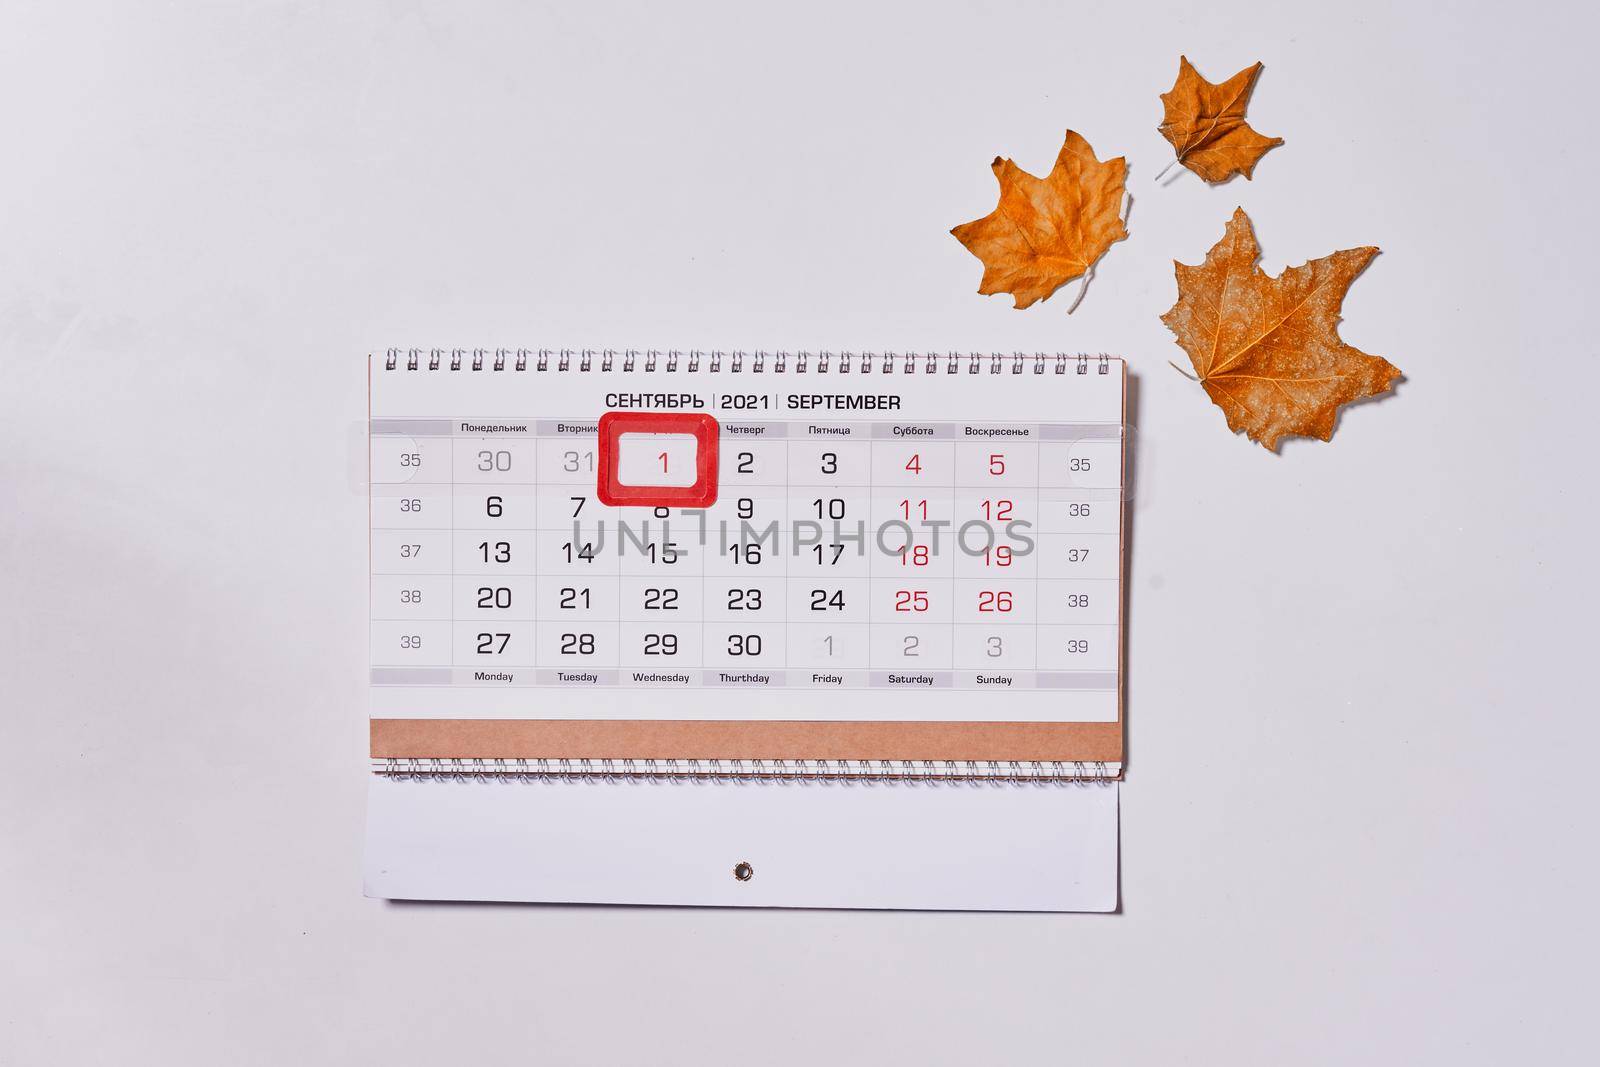 September 2021 monthly calendar and fall leaves on white background. Top view. Overhead view of Autumn month - September calendar